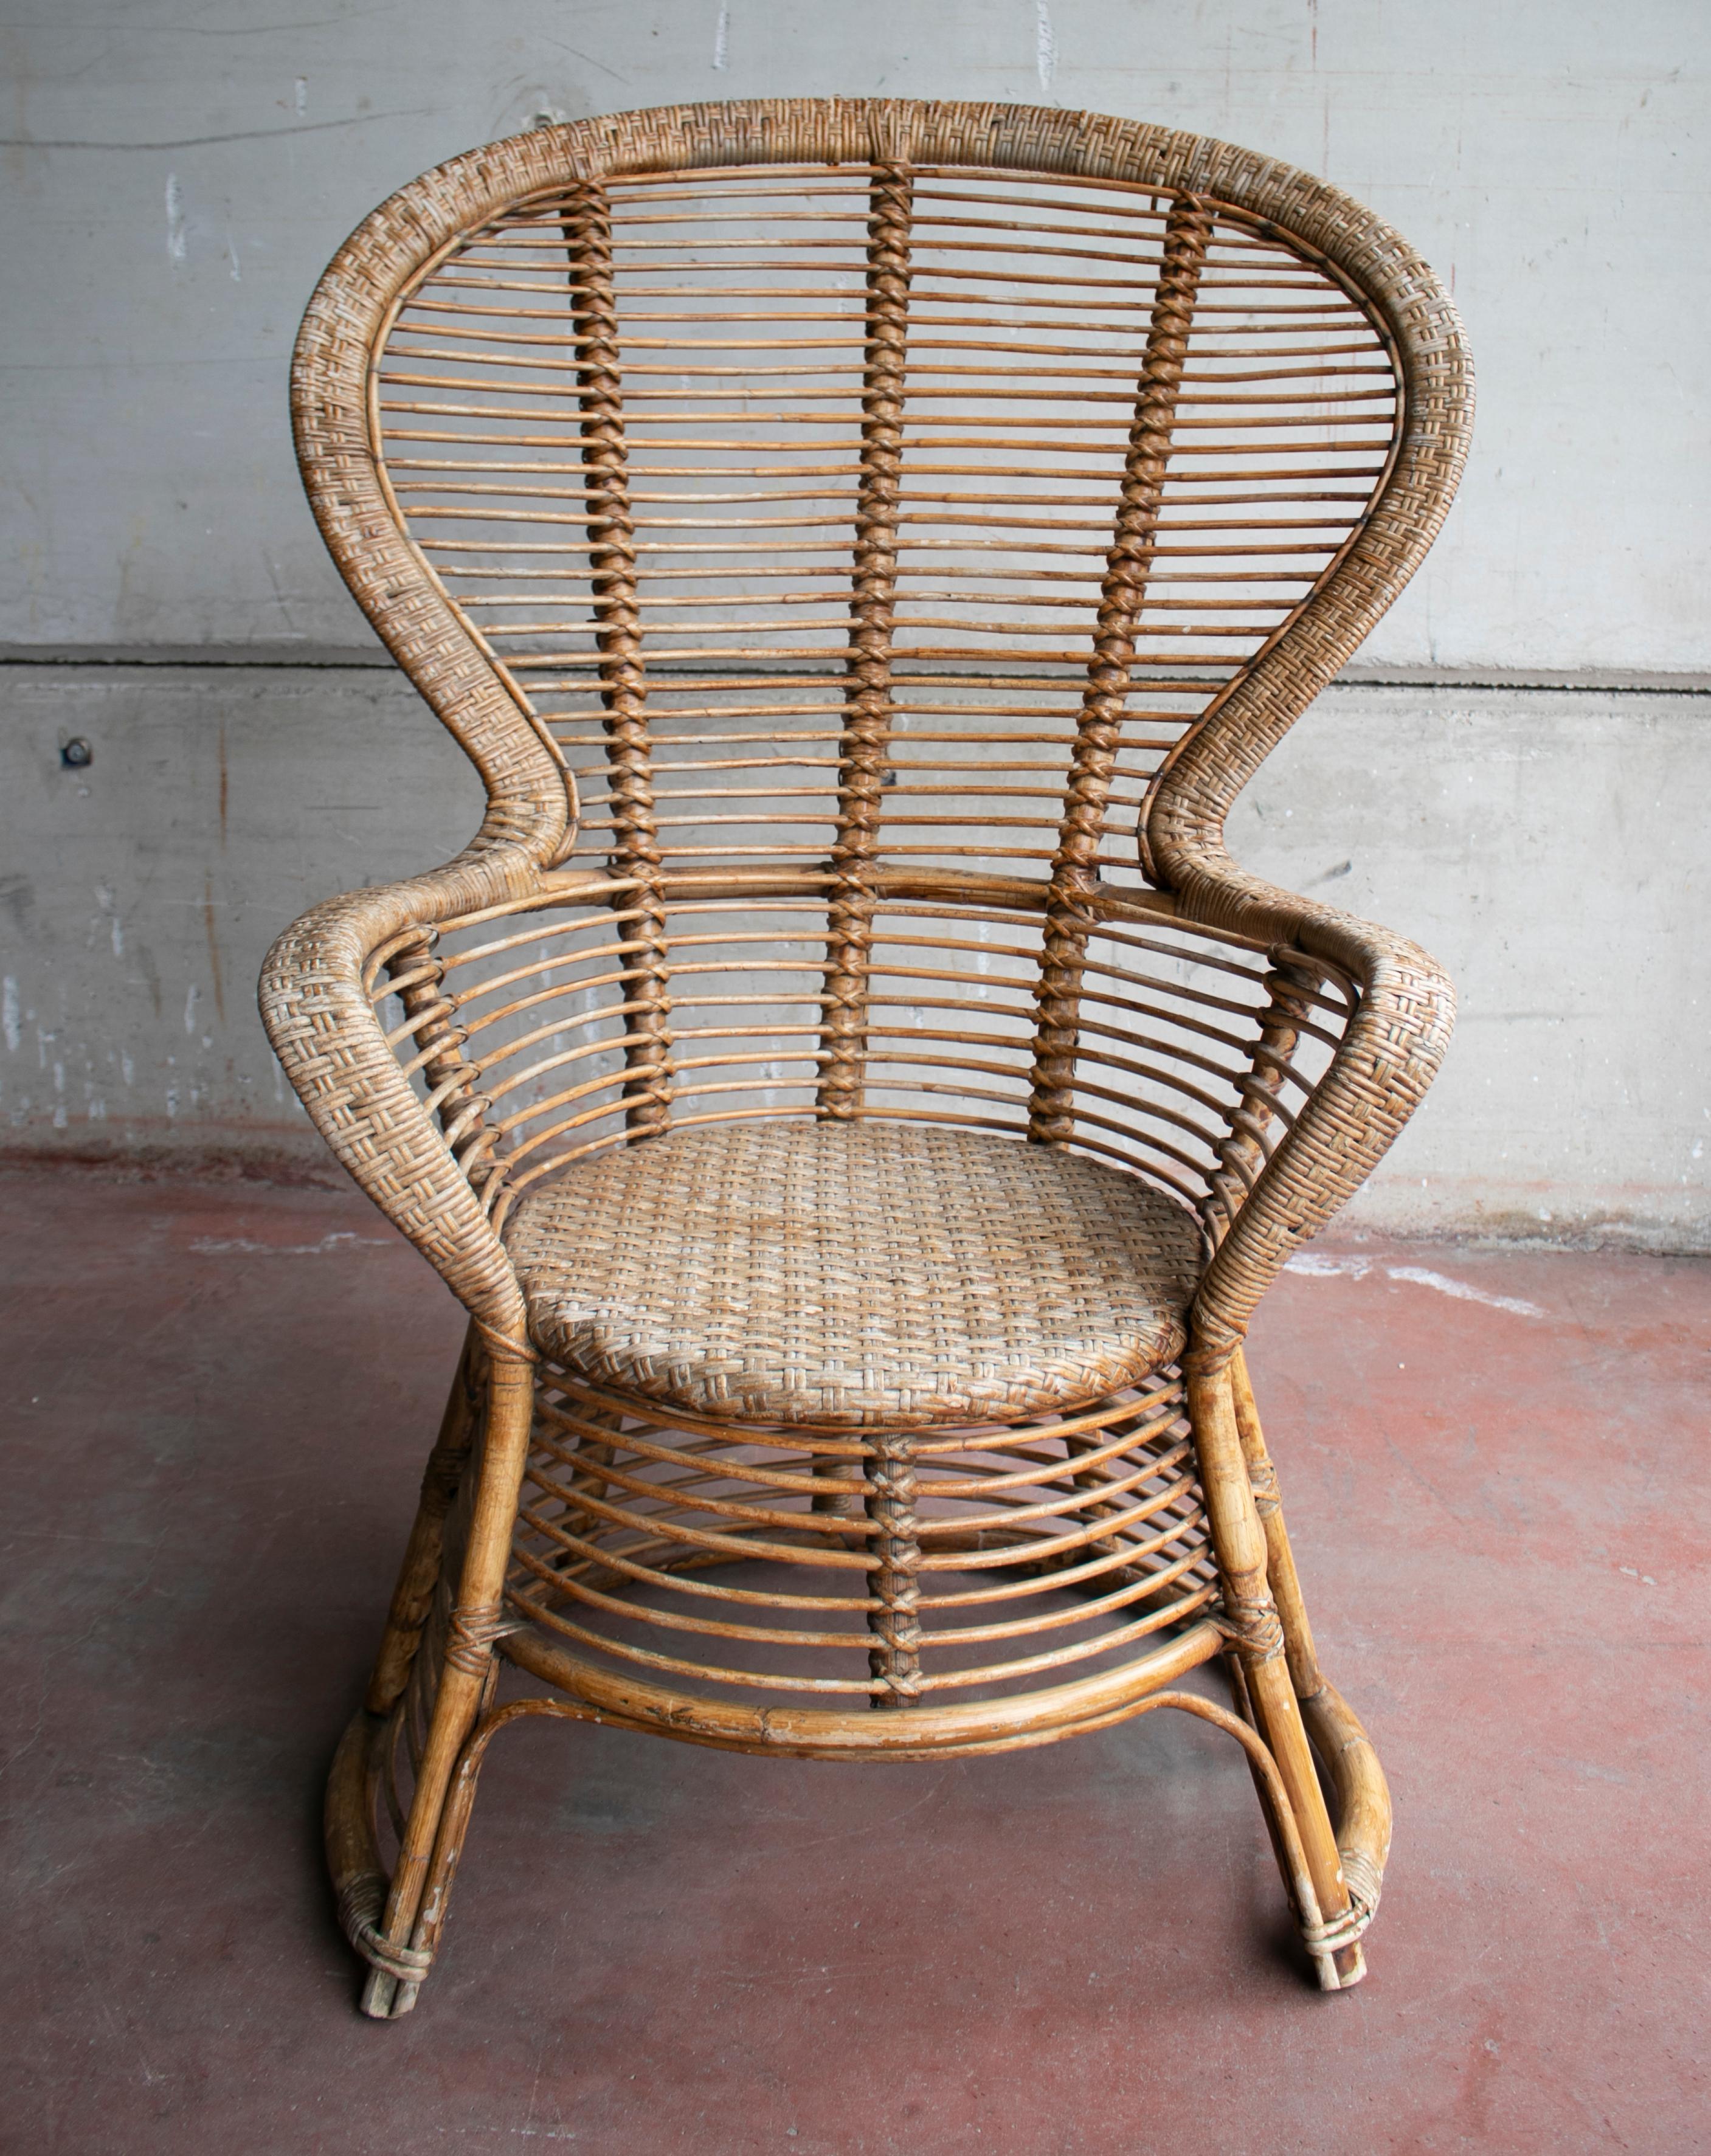 1970s Spanish armchair of bamboo wicker tall back rest.